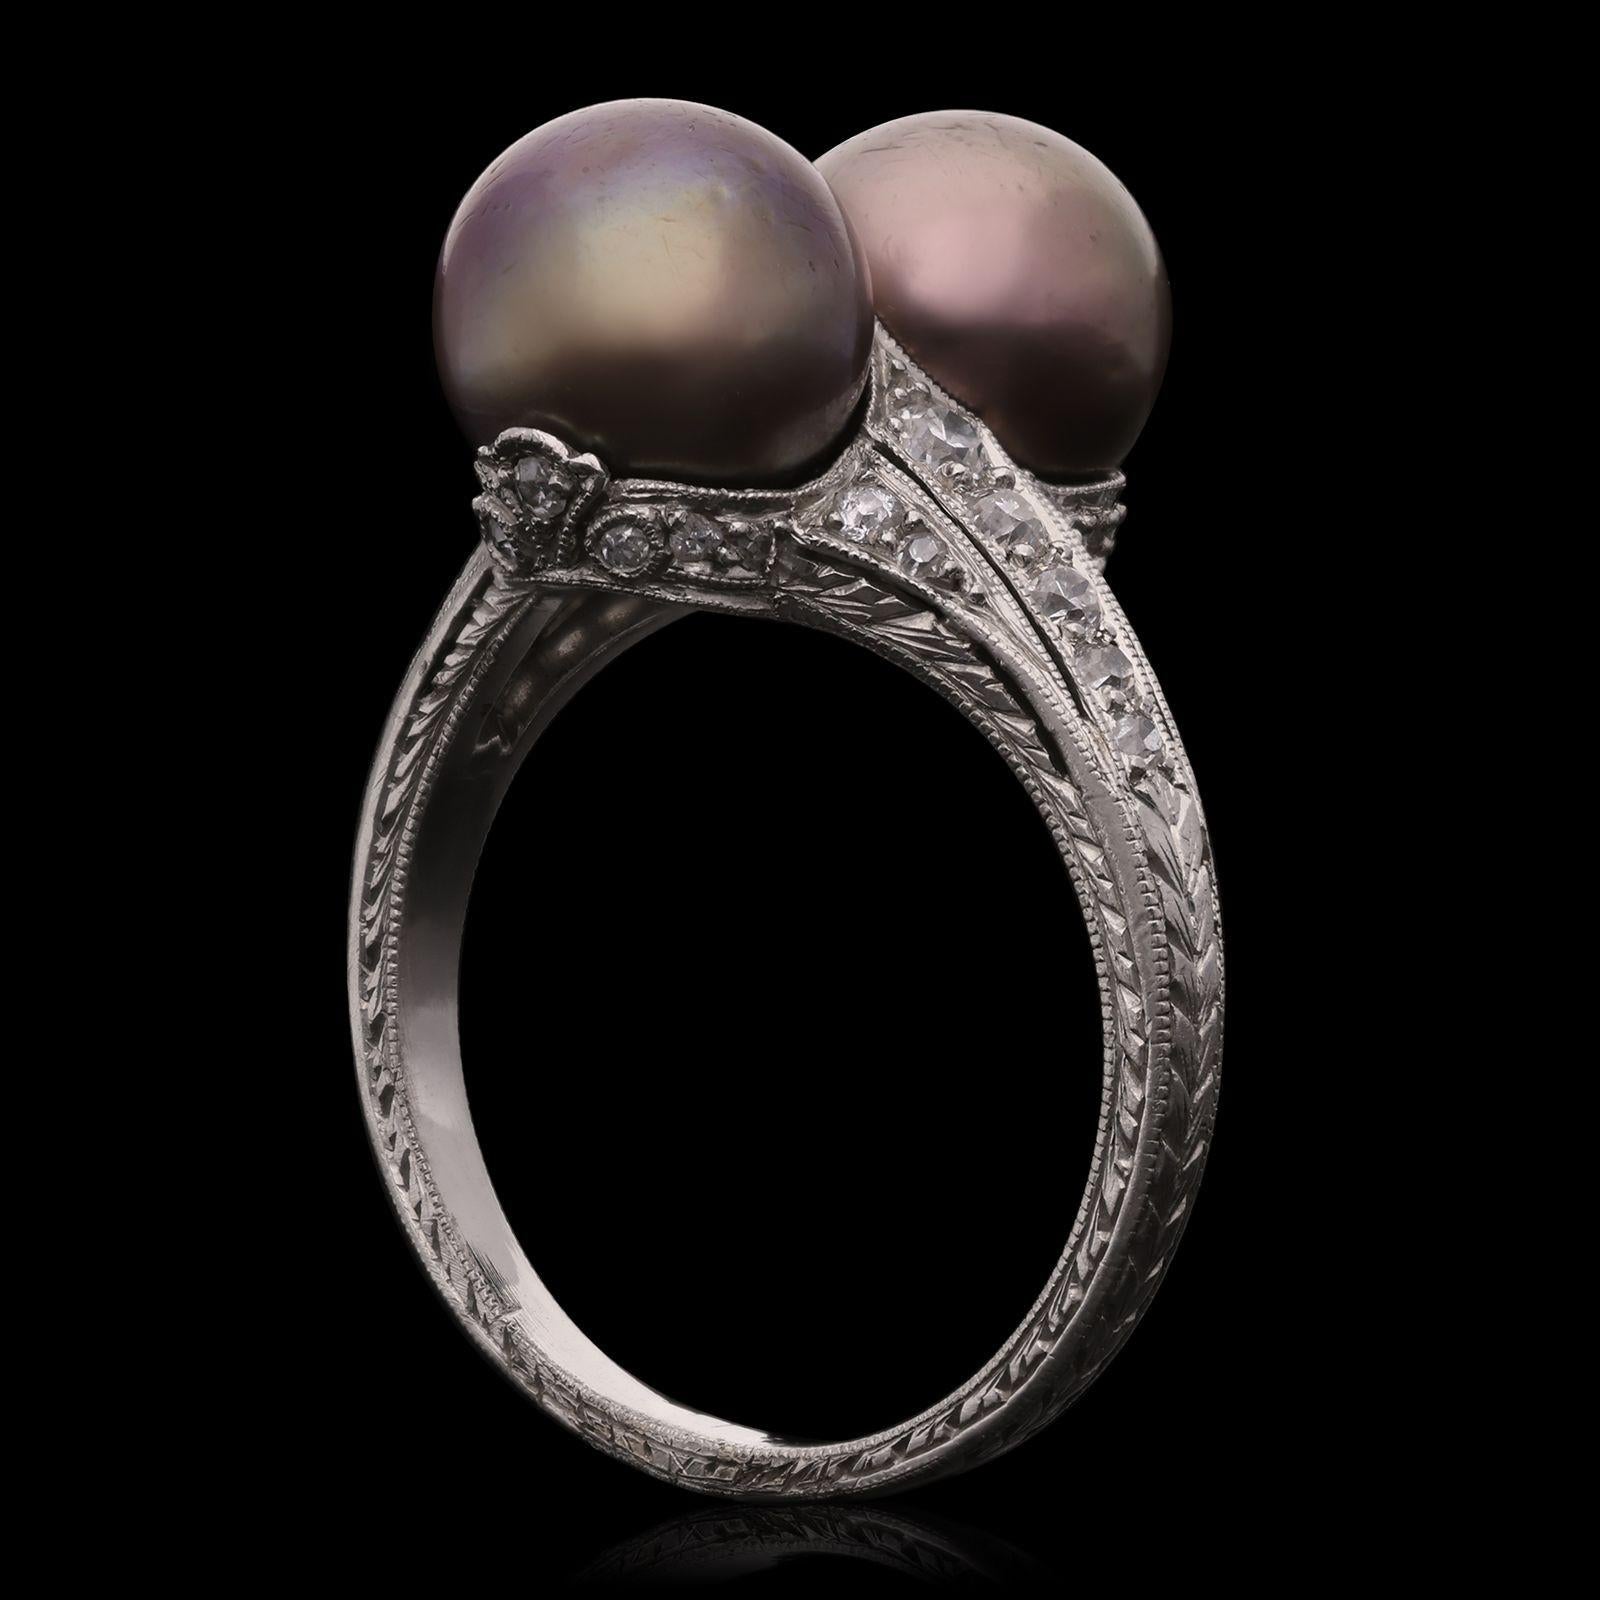 antique pearl ring